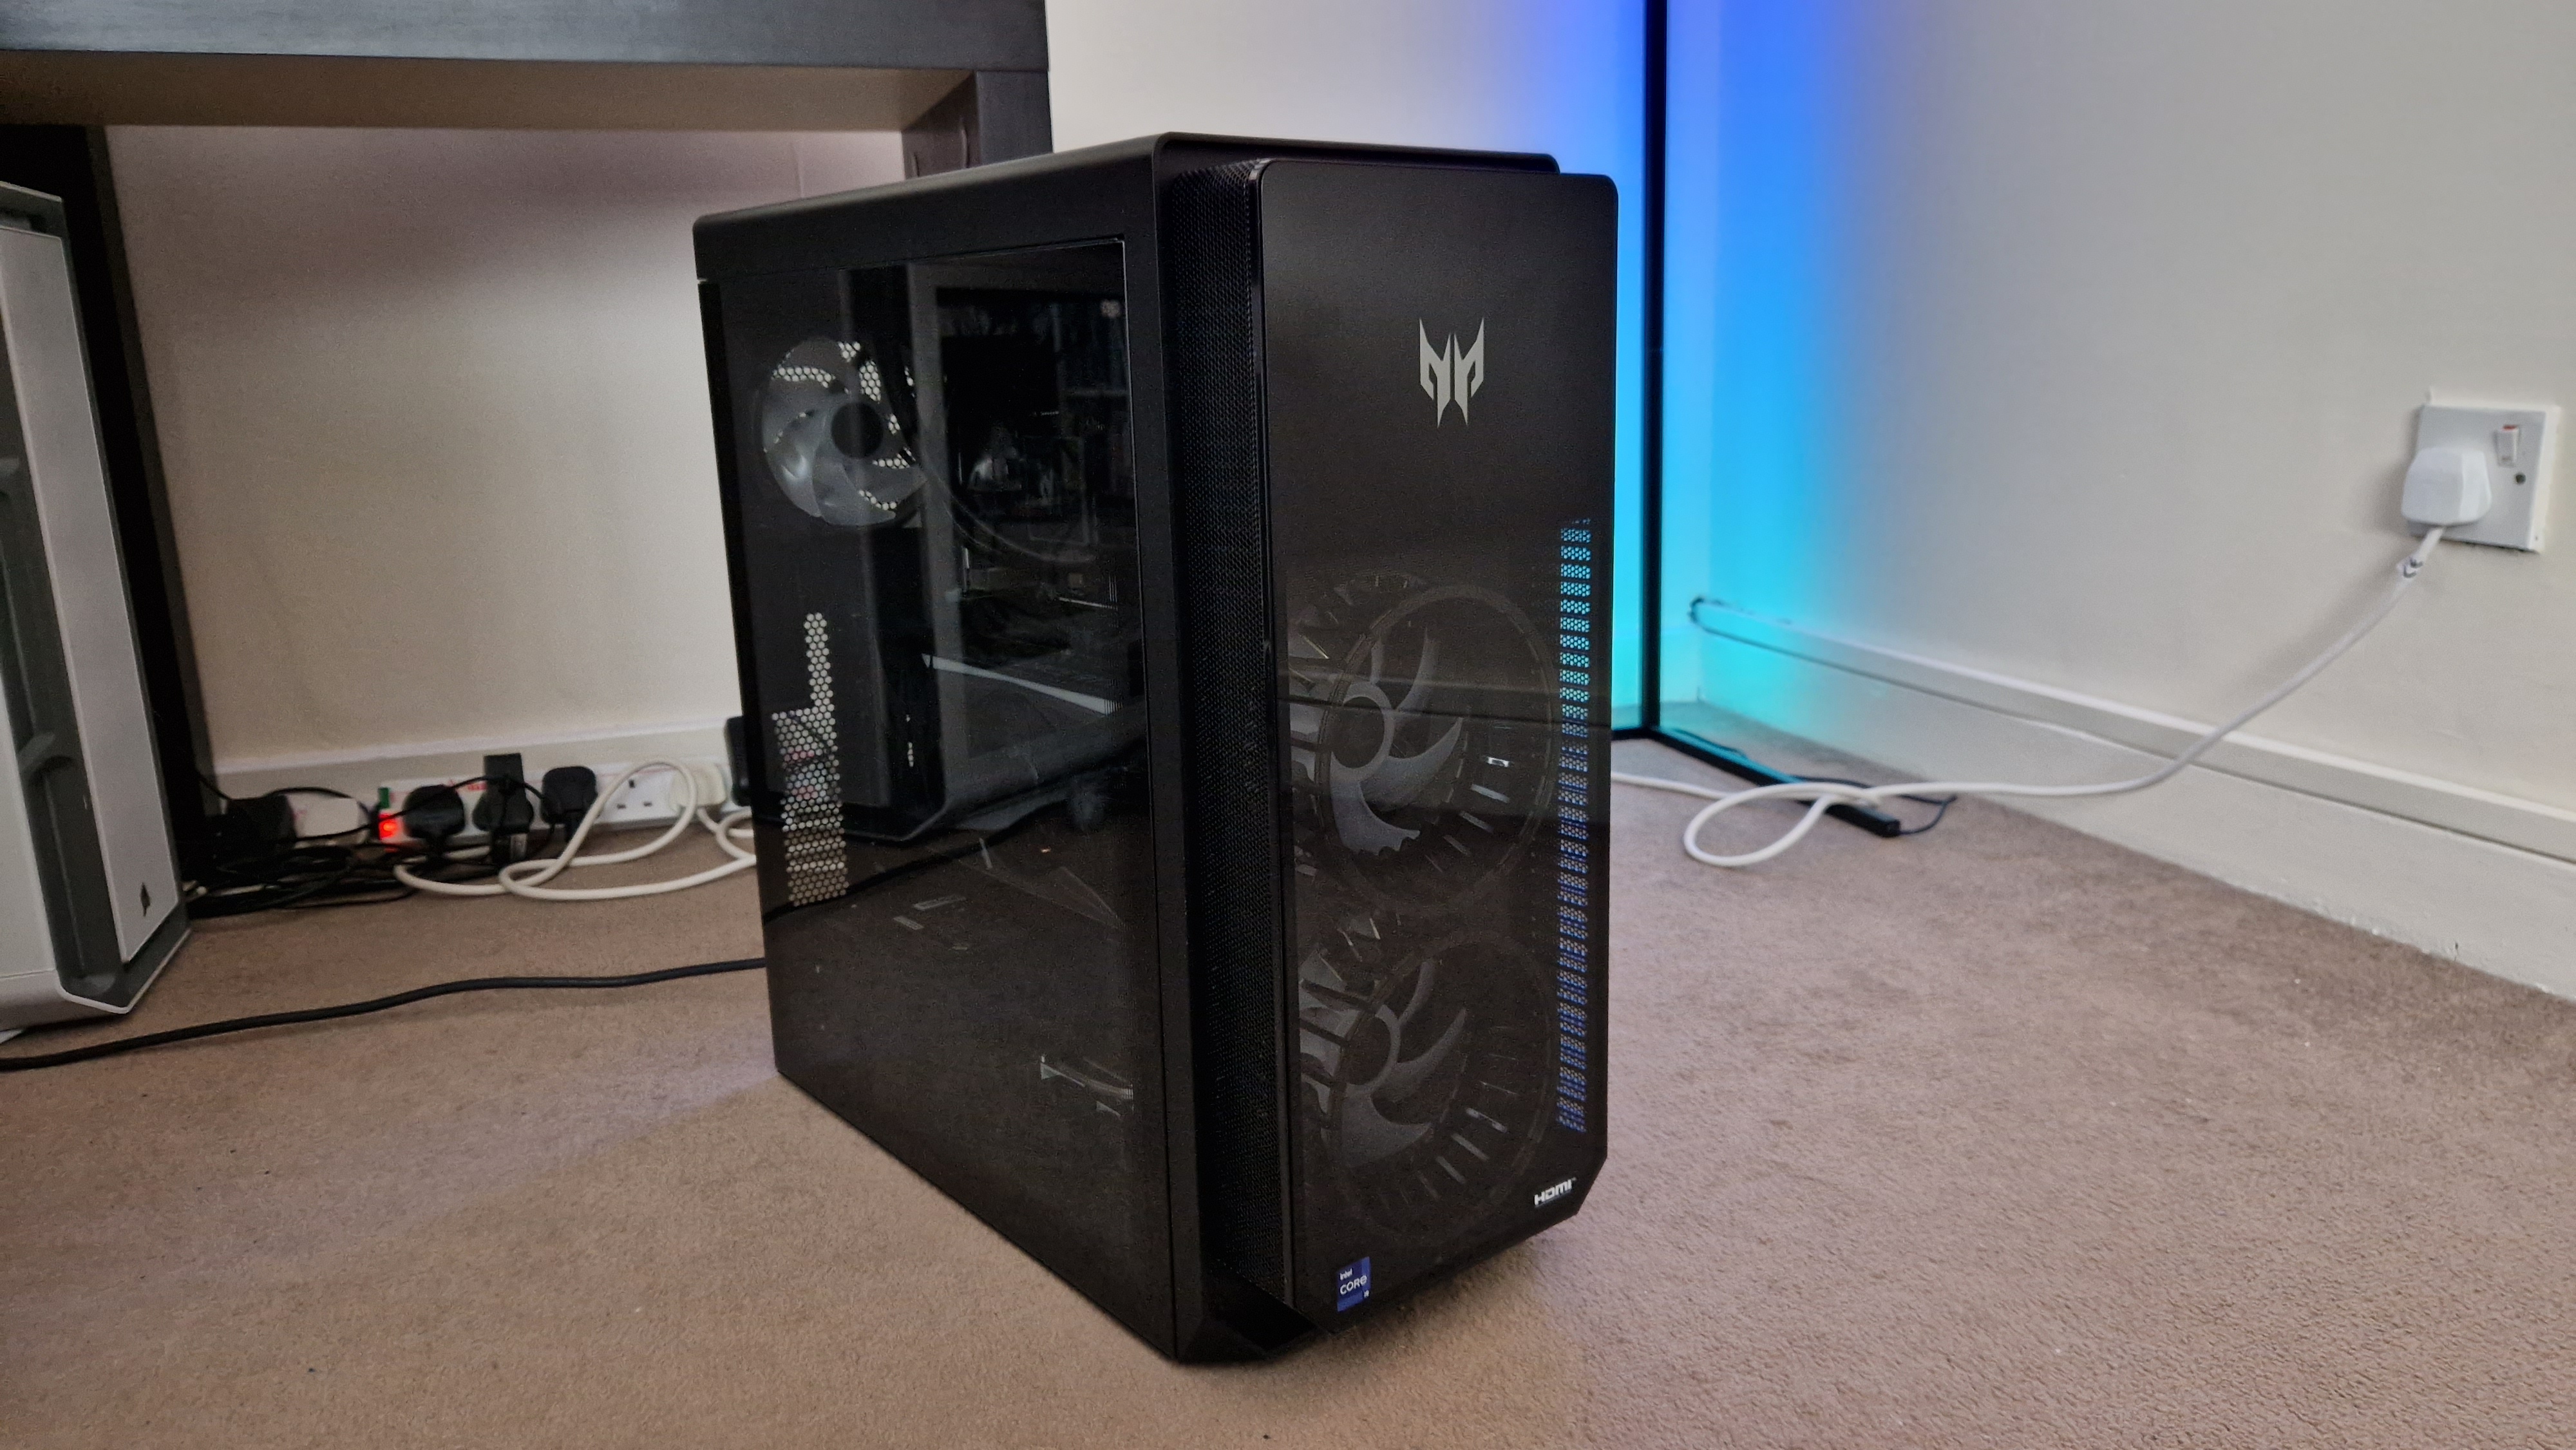 Acer Predator Orion 7000 switched off, showing the lush blacks of its chassis